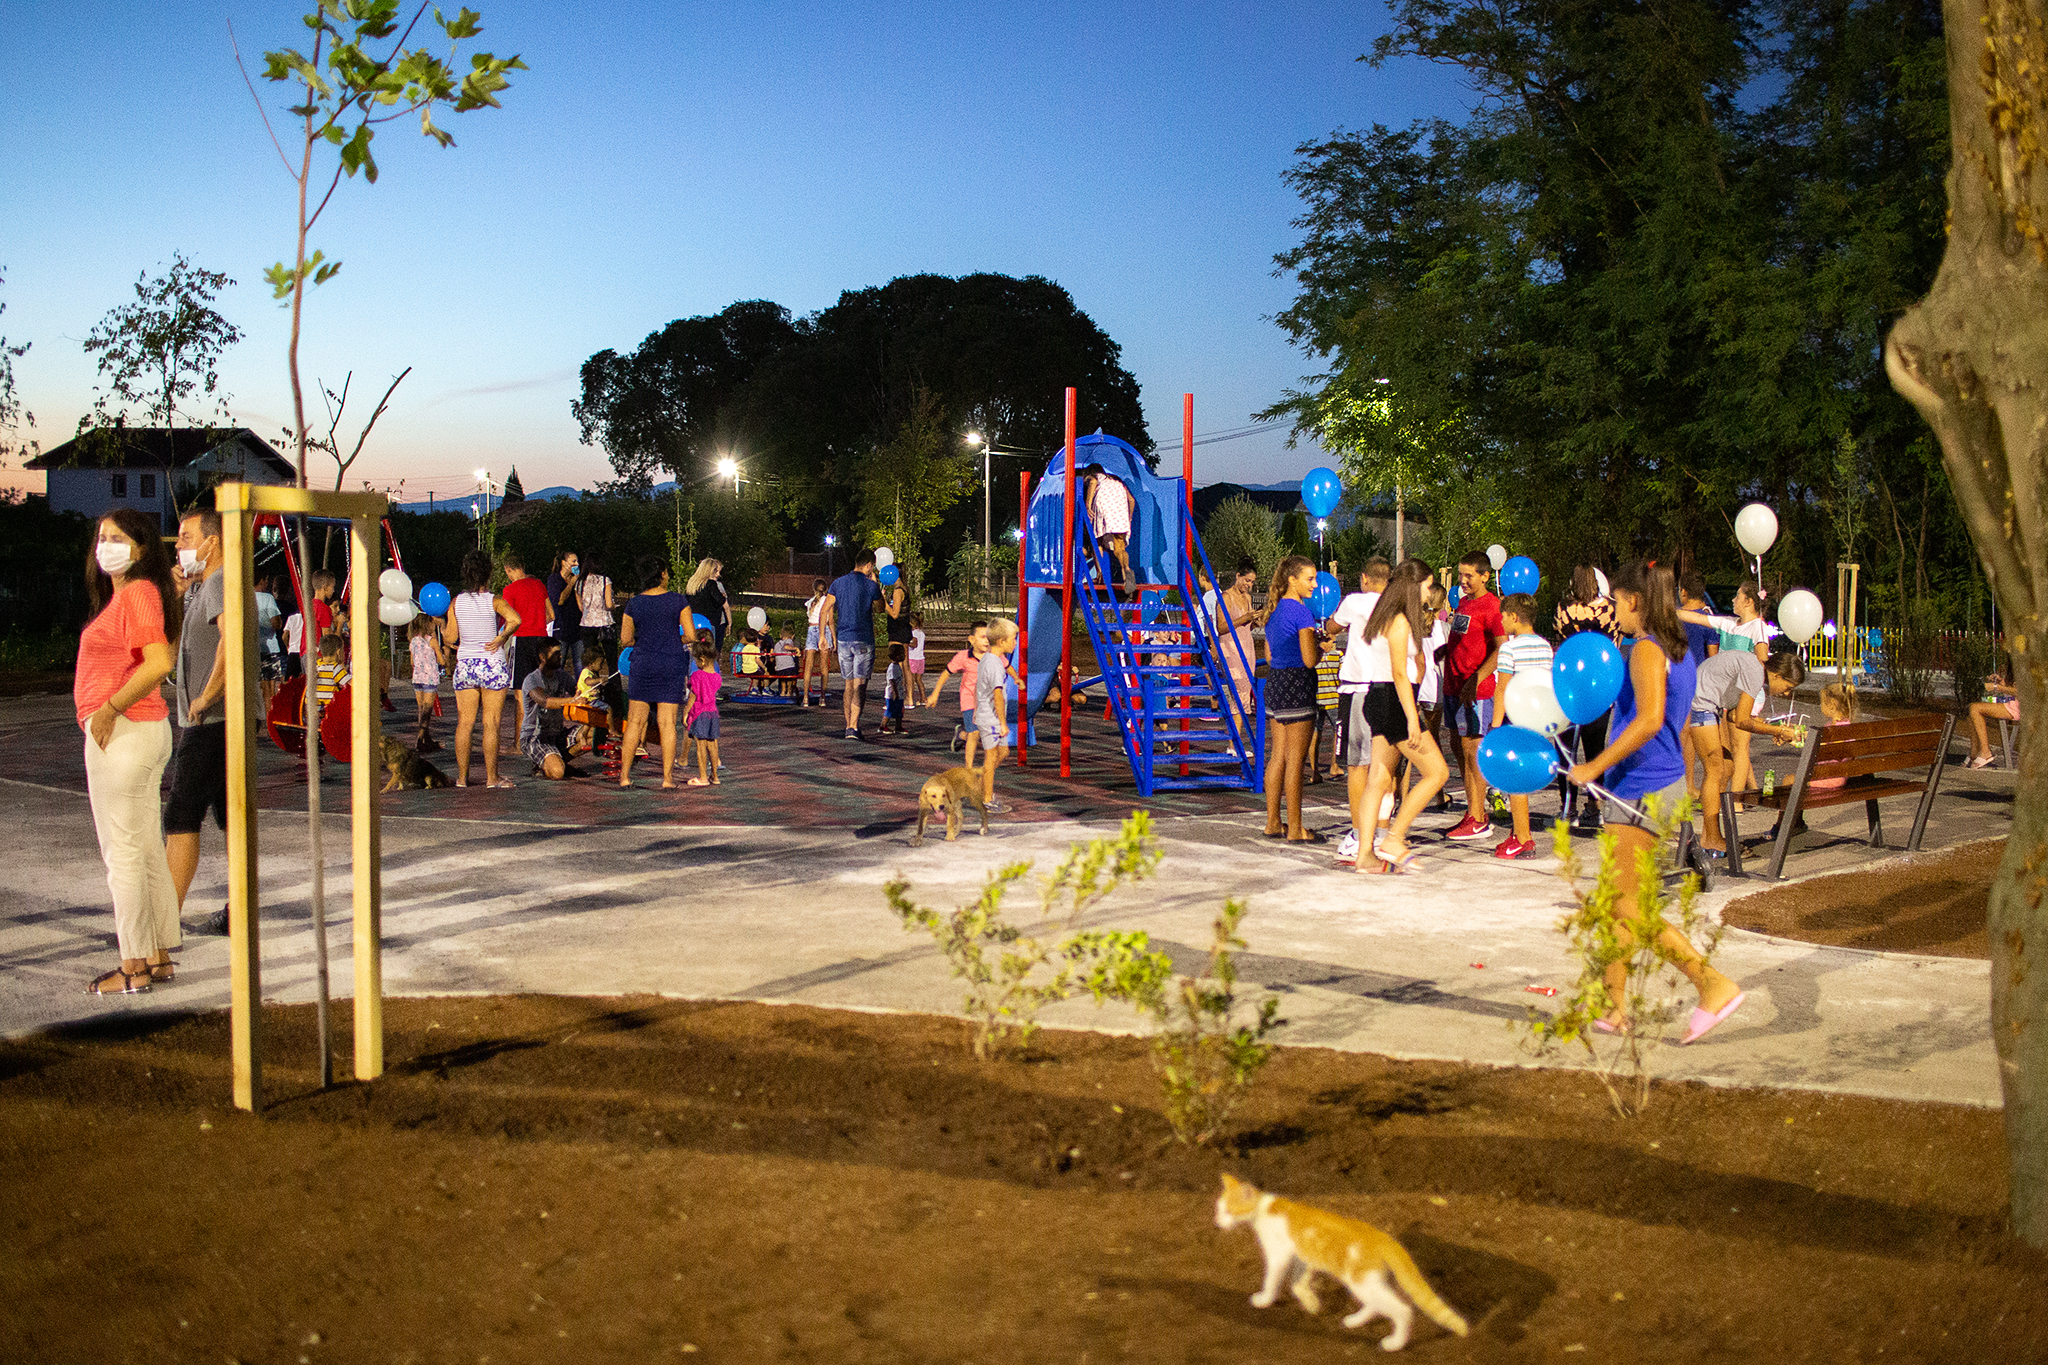 A New children's playground opened in Golubovci